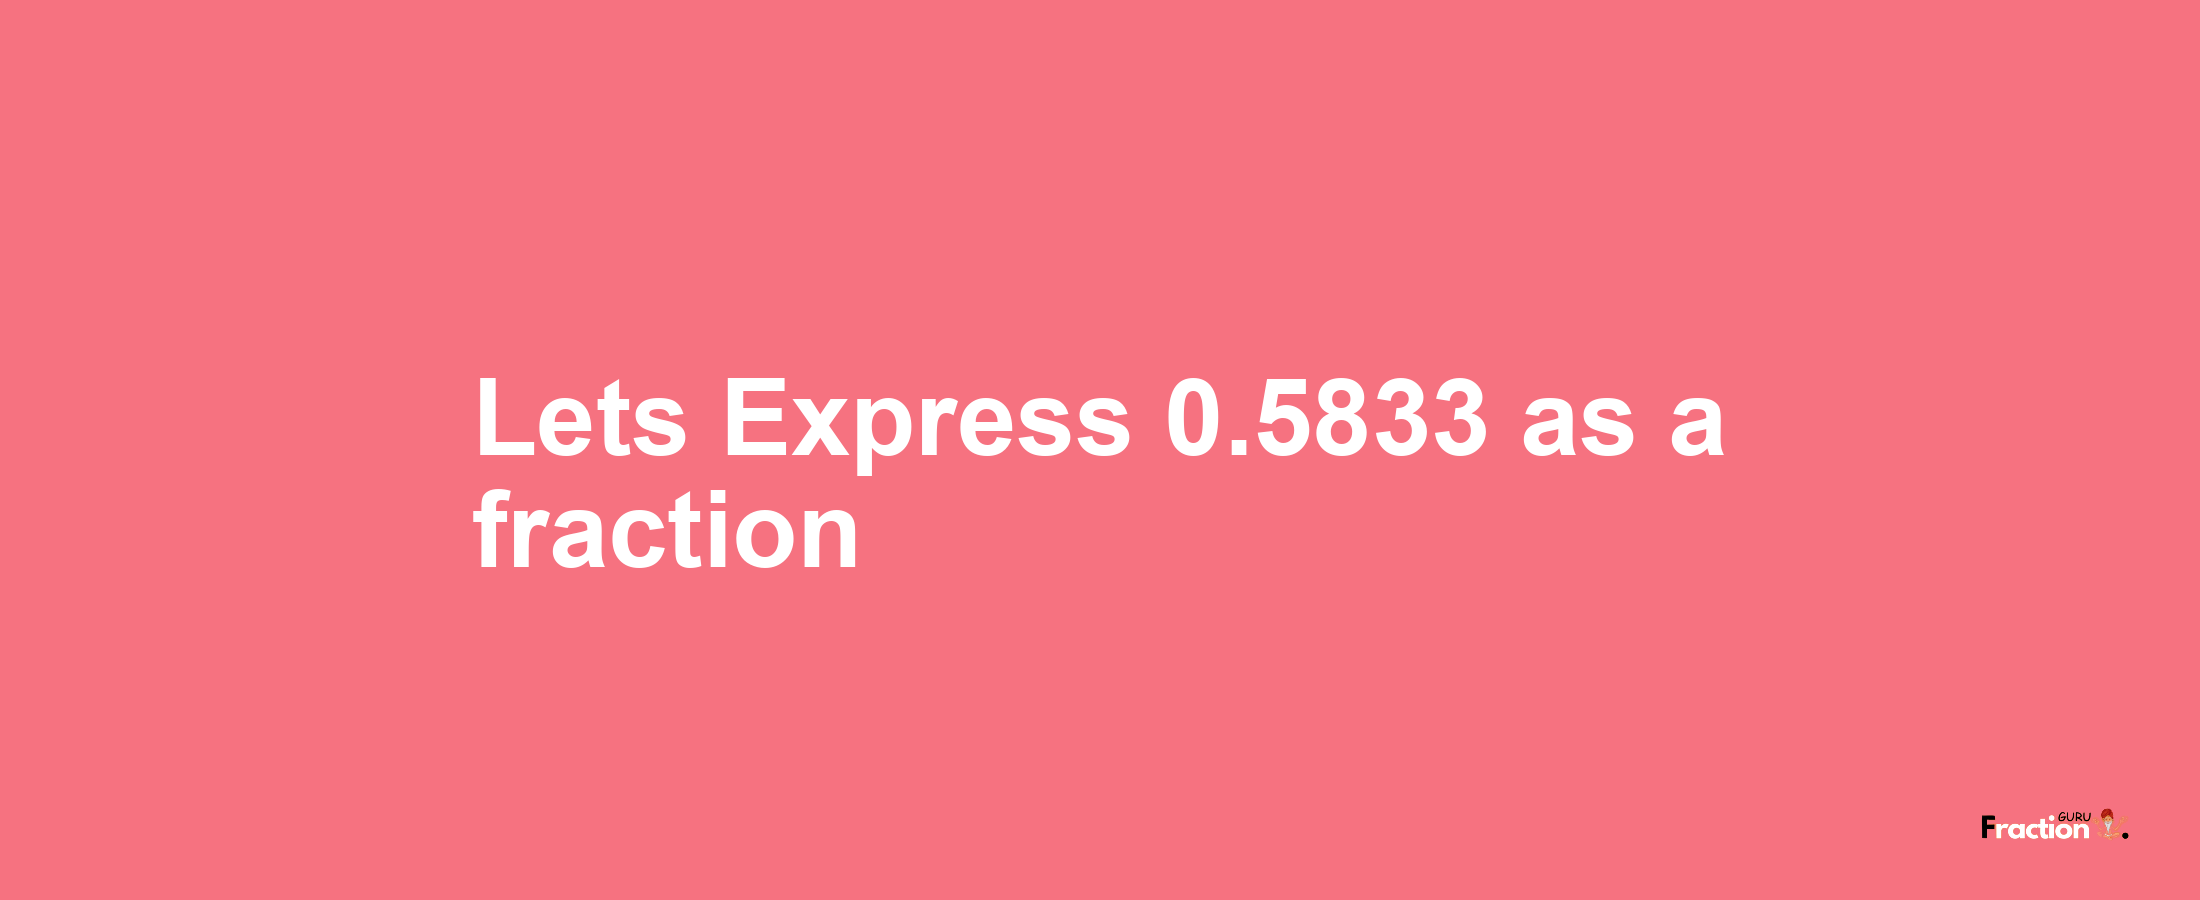 Lets Express 0.5833 as afraction